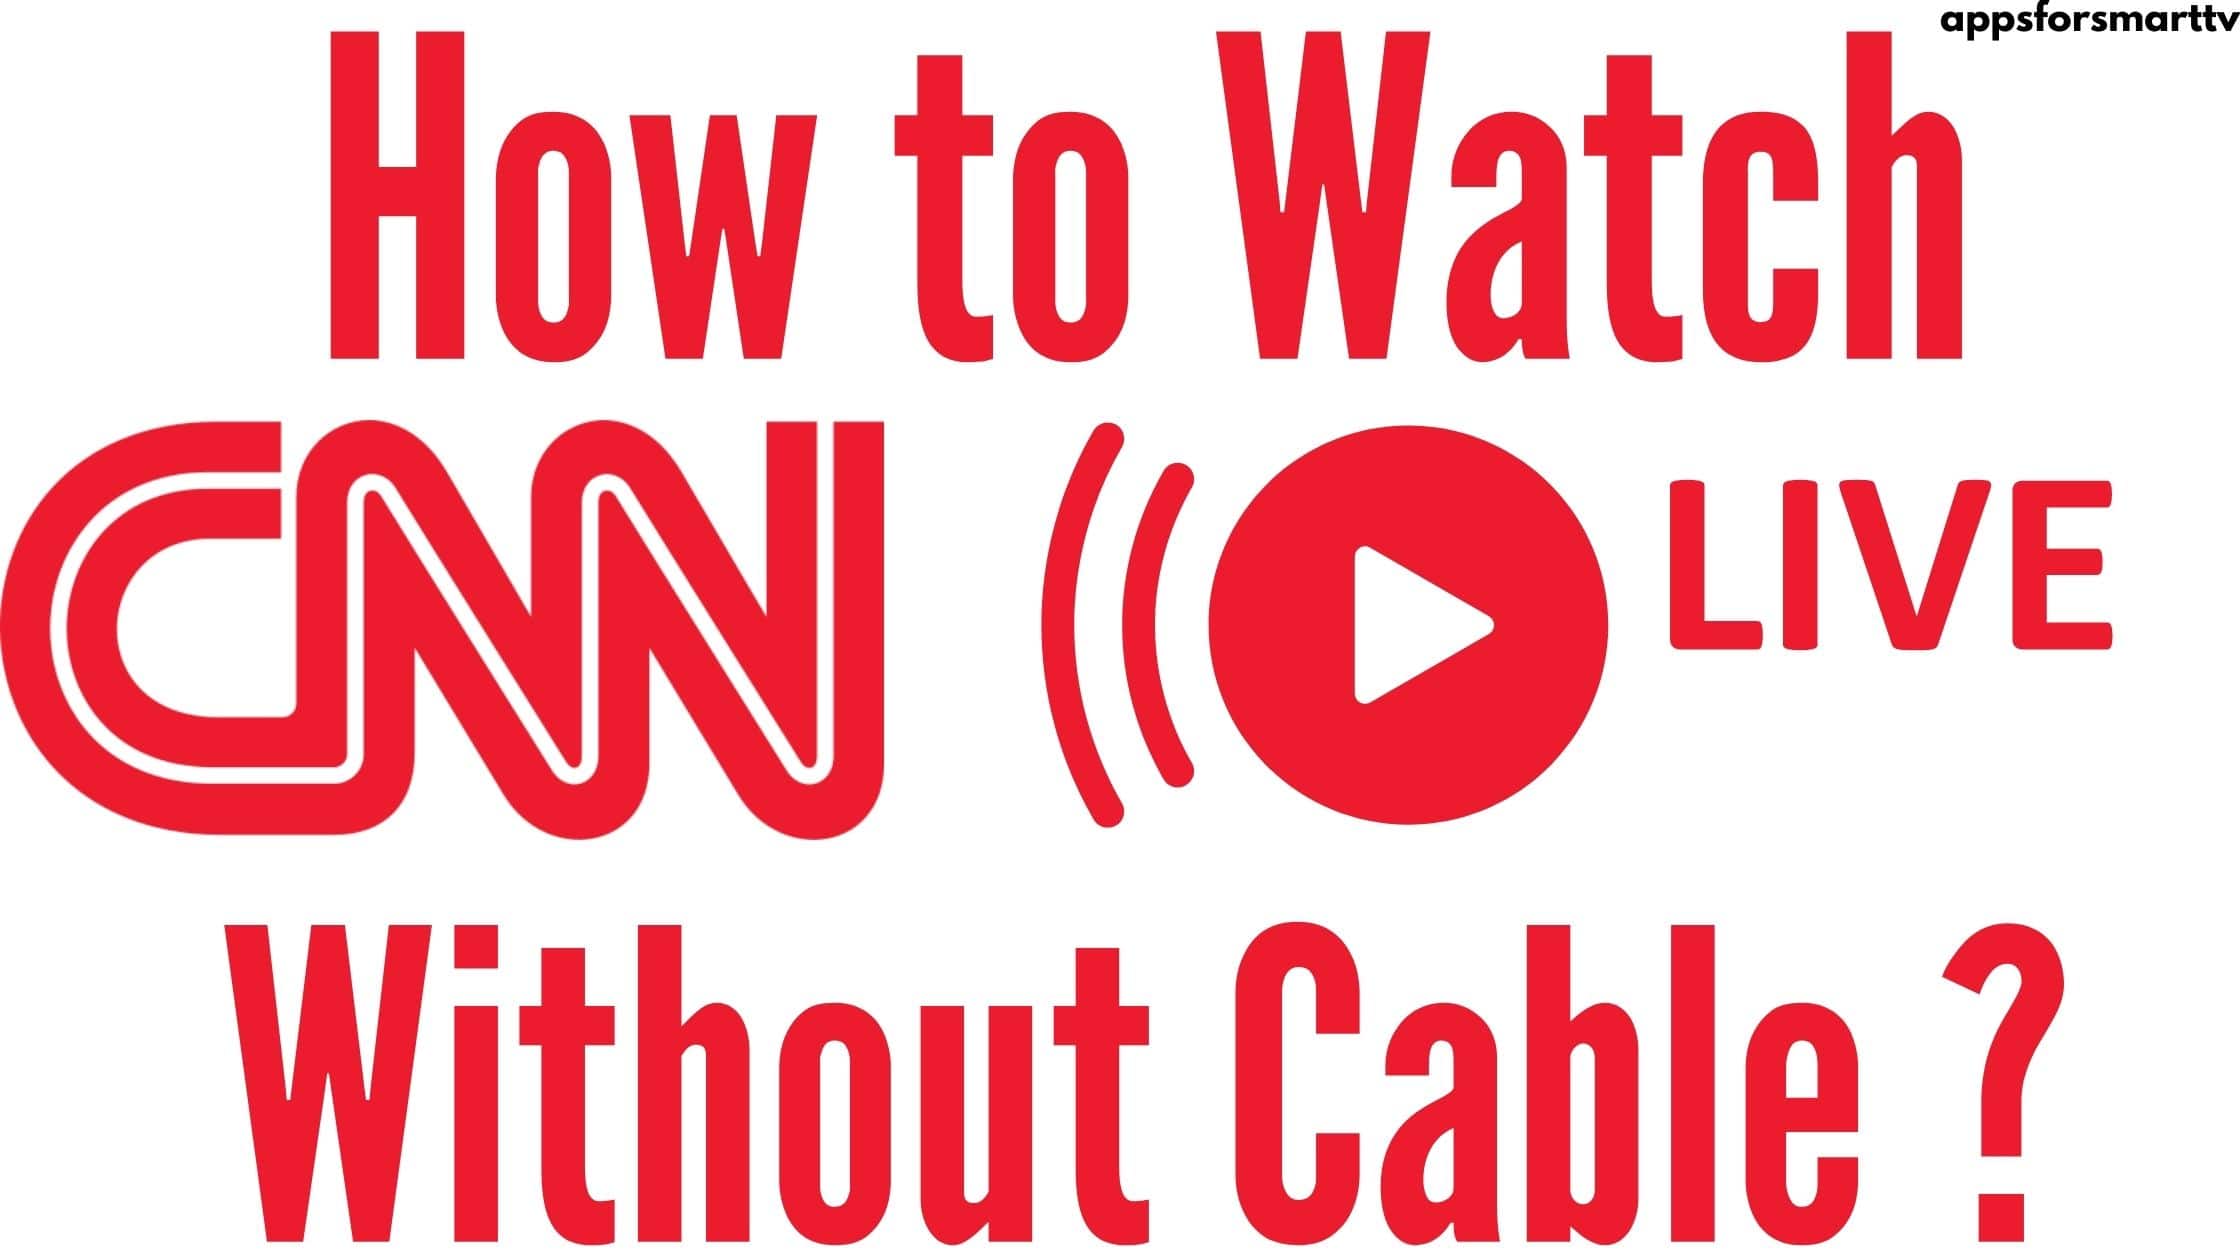 How to Watch CNN Live Without Cable Town Hall